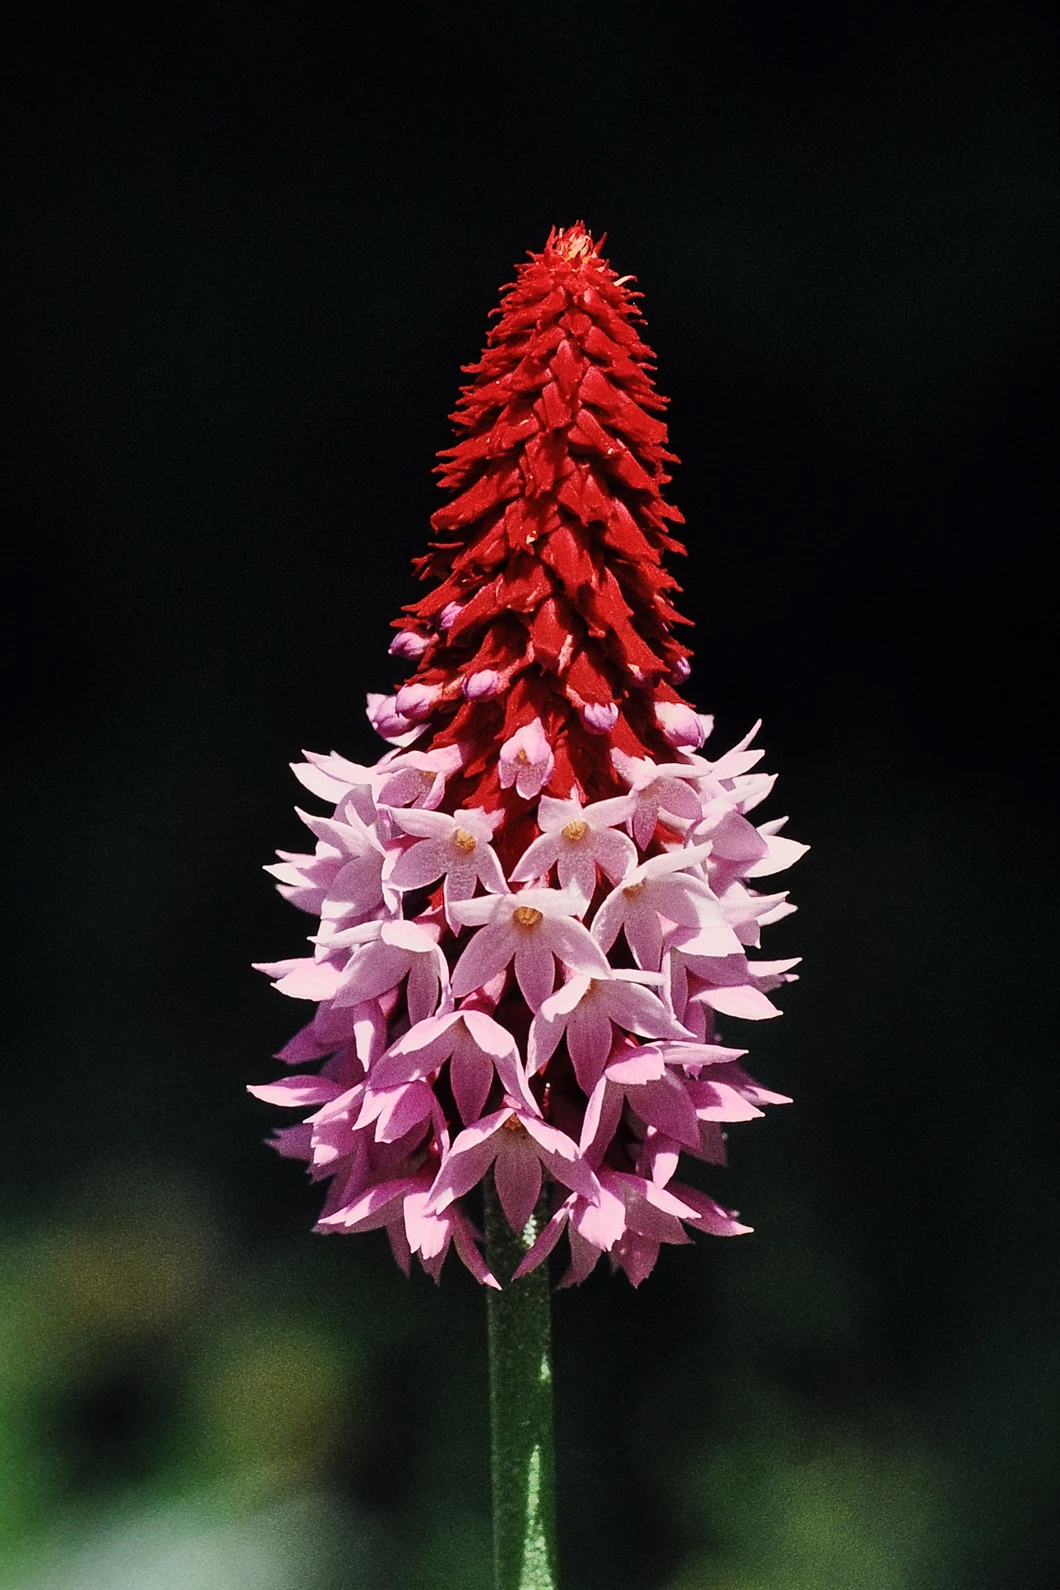 Primula vialii Growing in the mountains of China